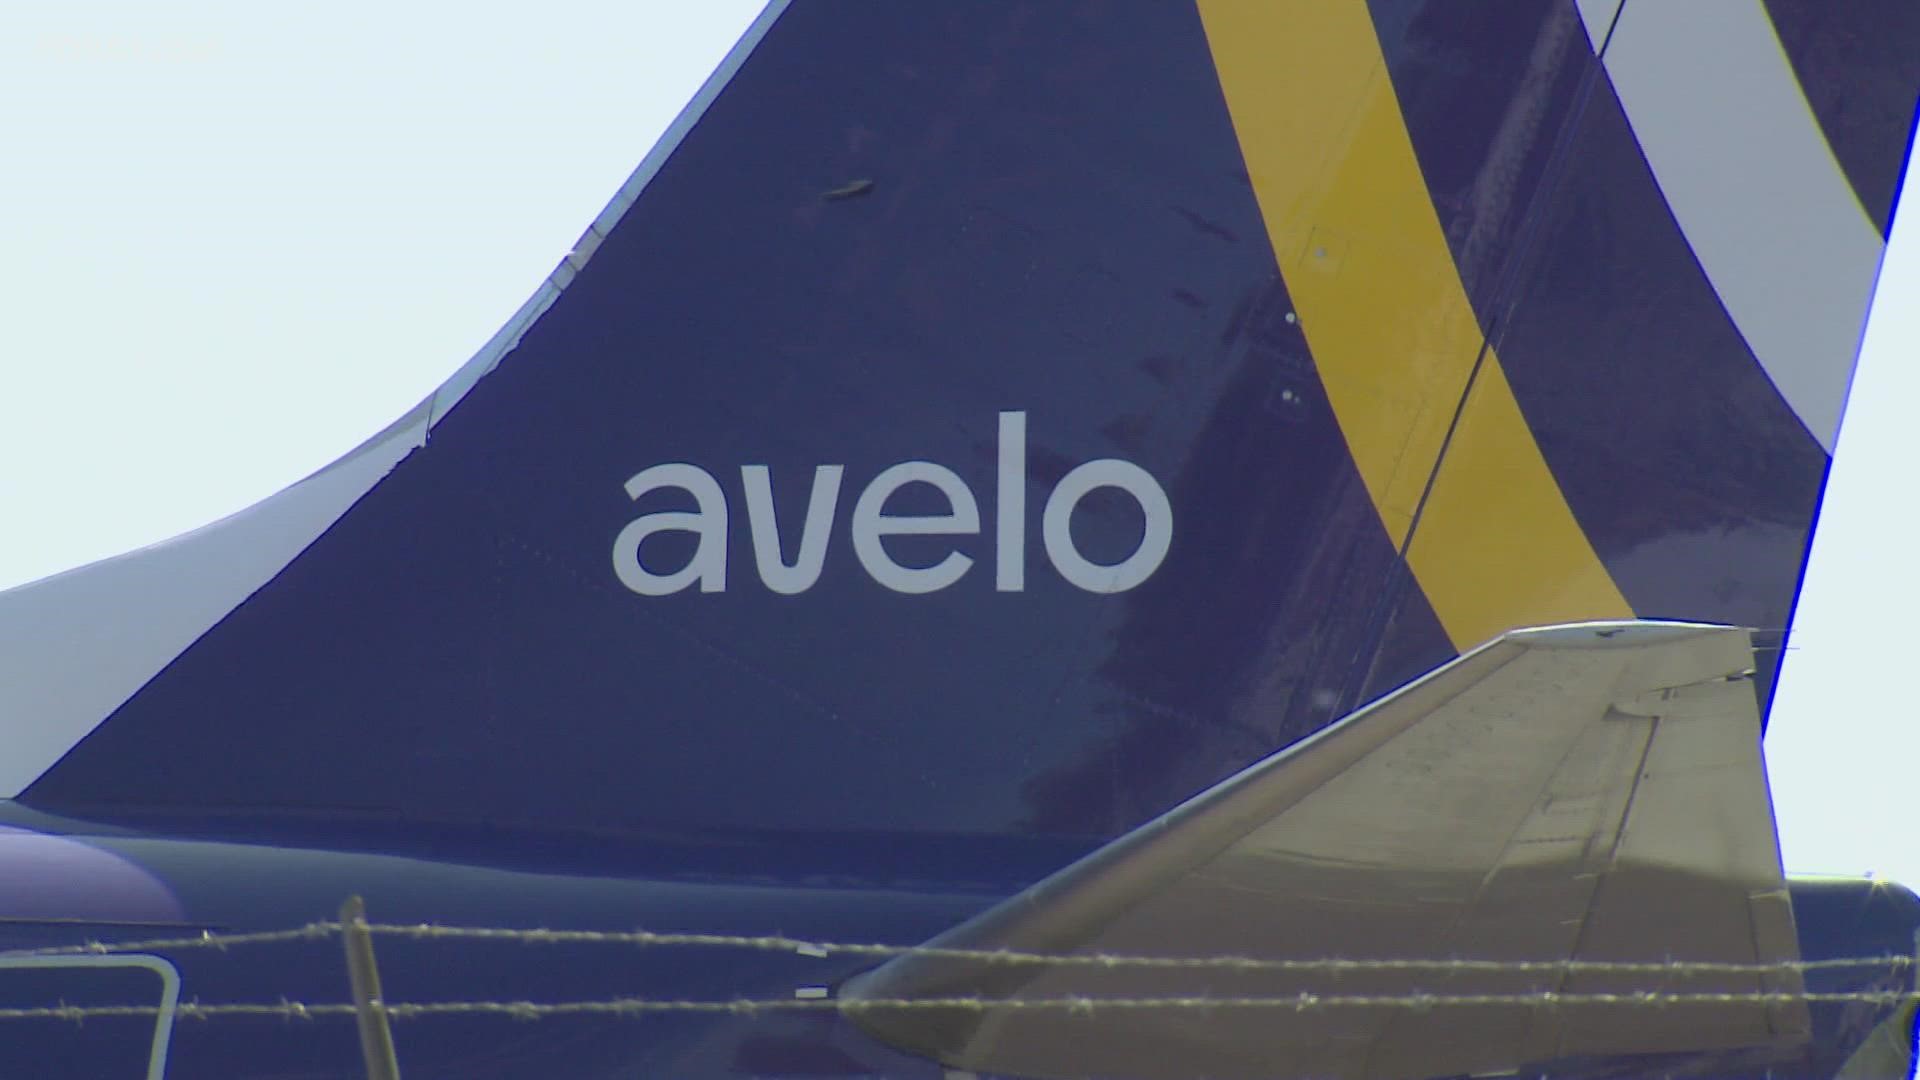 Avelo Airlines features 14 arrivals and departures a day